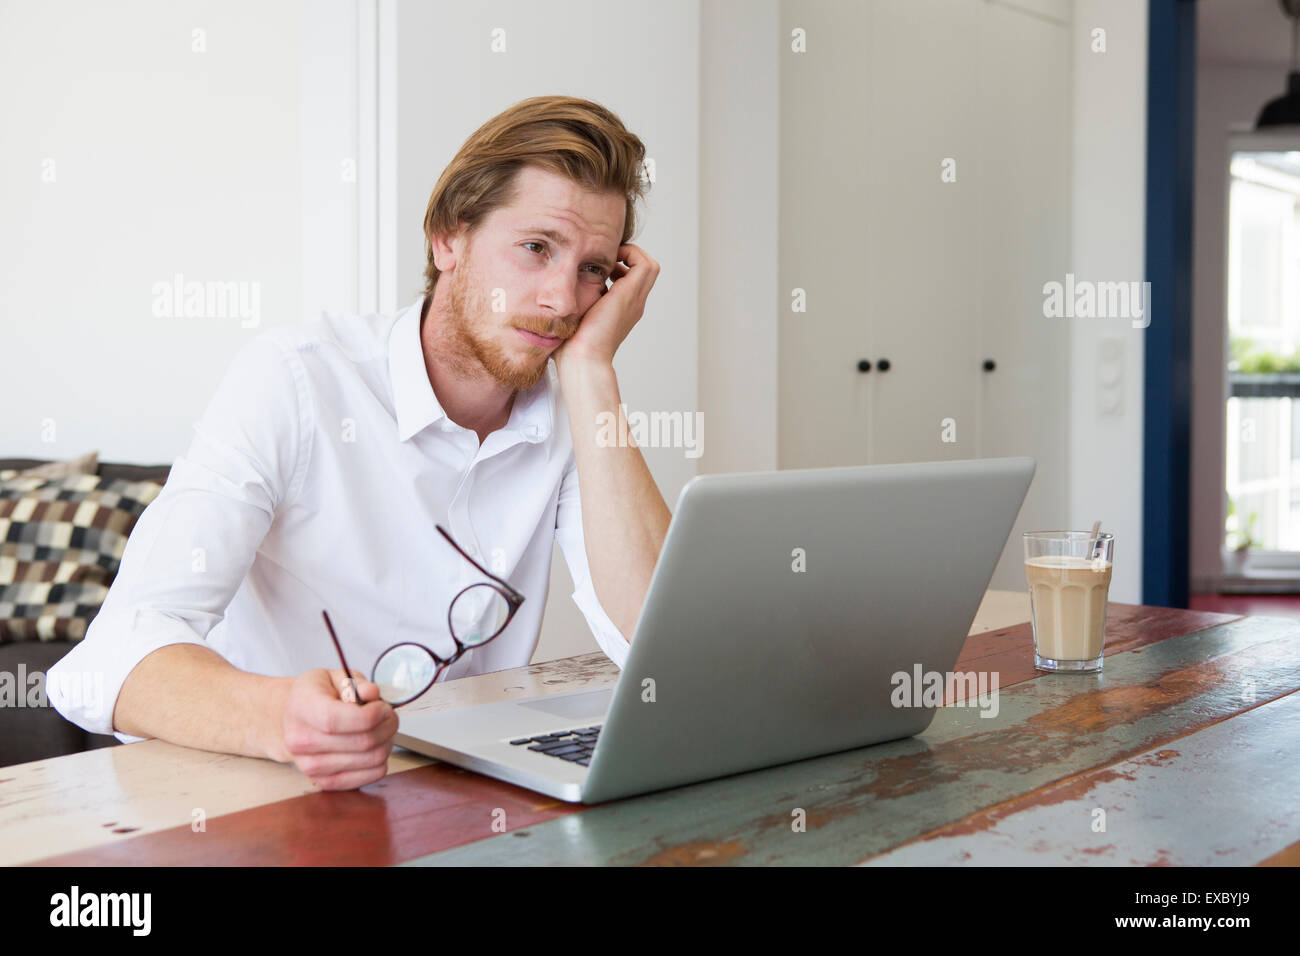 red-haired young man sitting at table with his laptop and looking sad Stock Photo